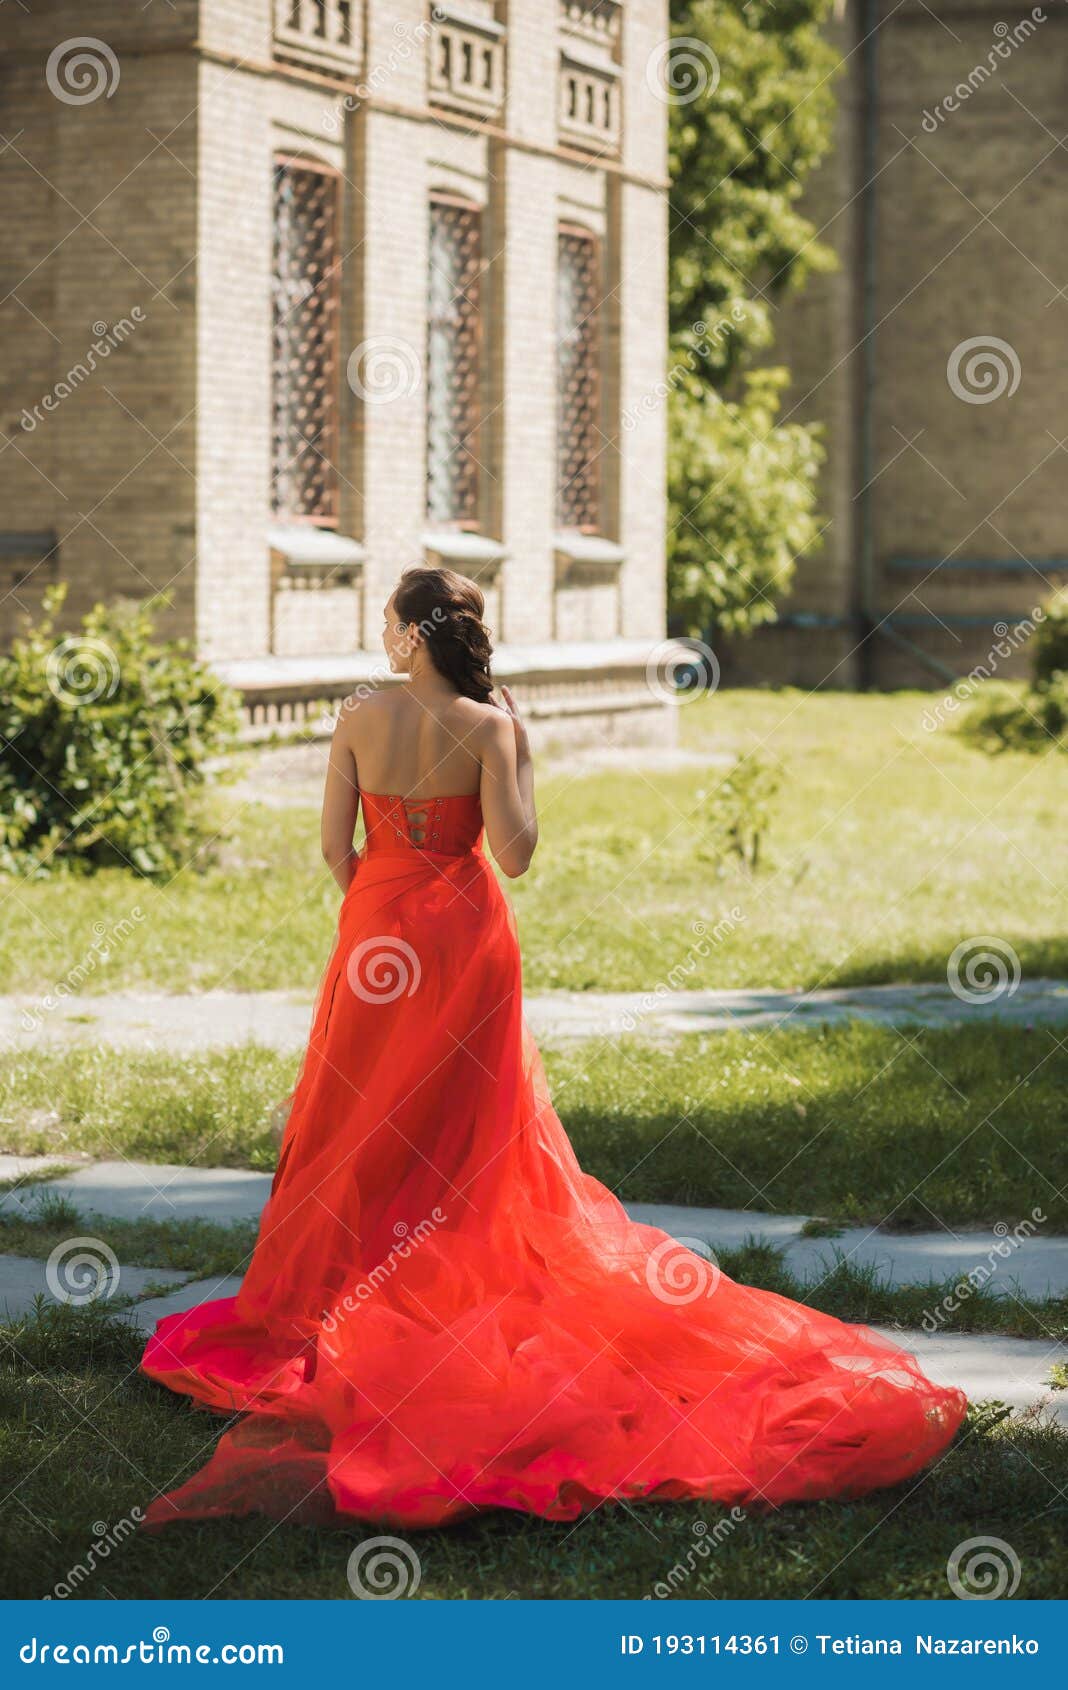 elegant red dress outfit